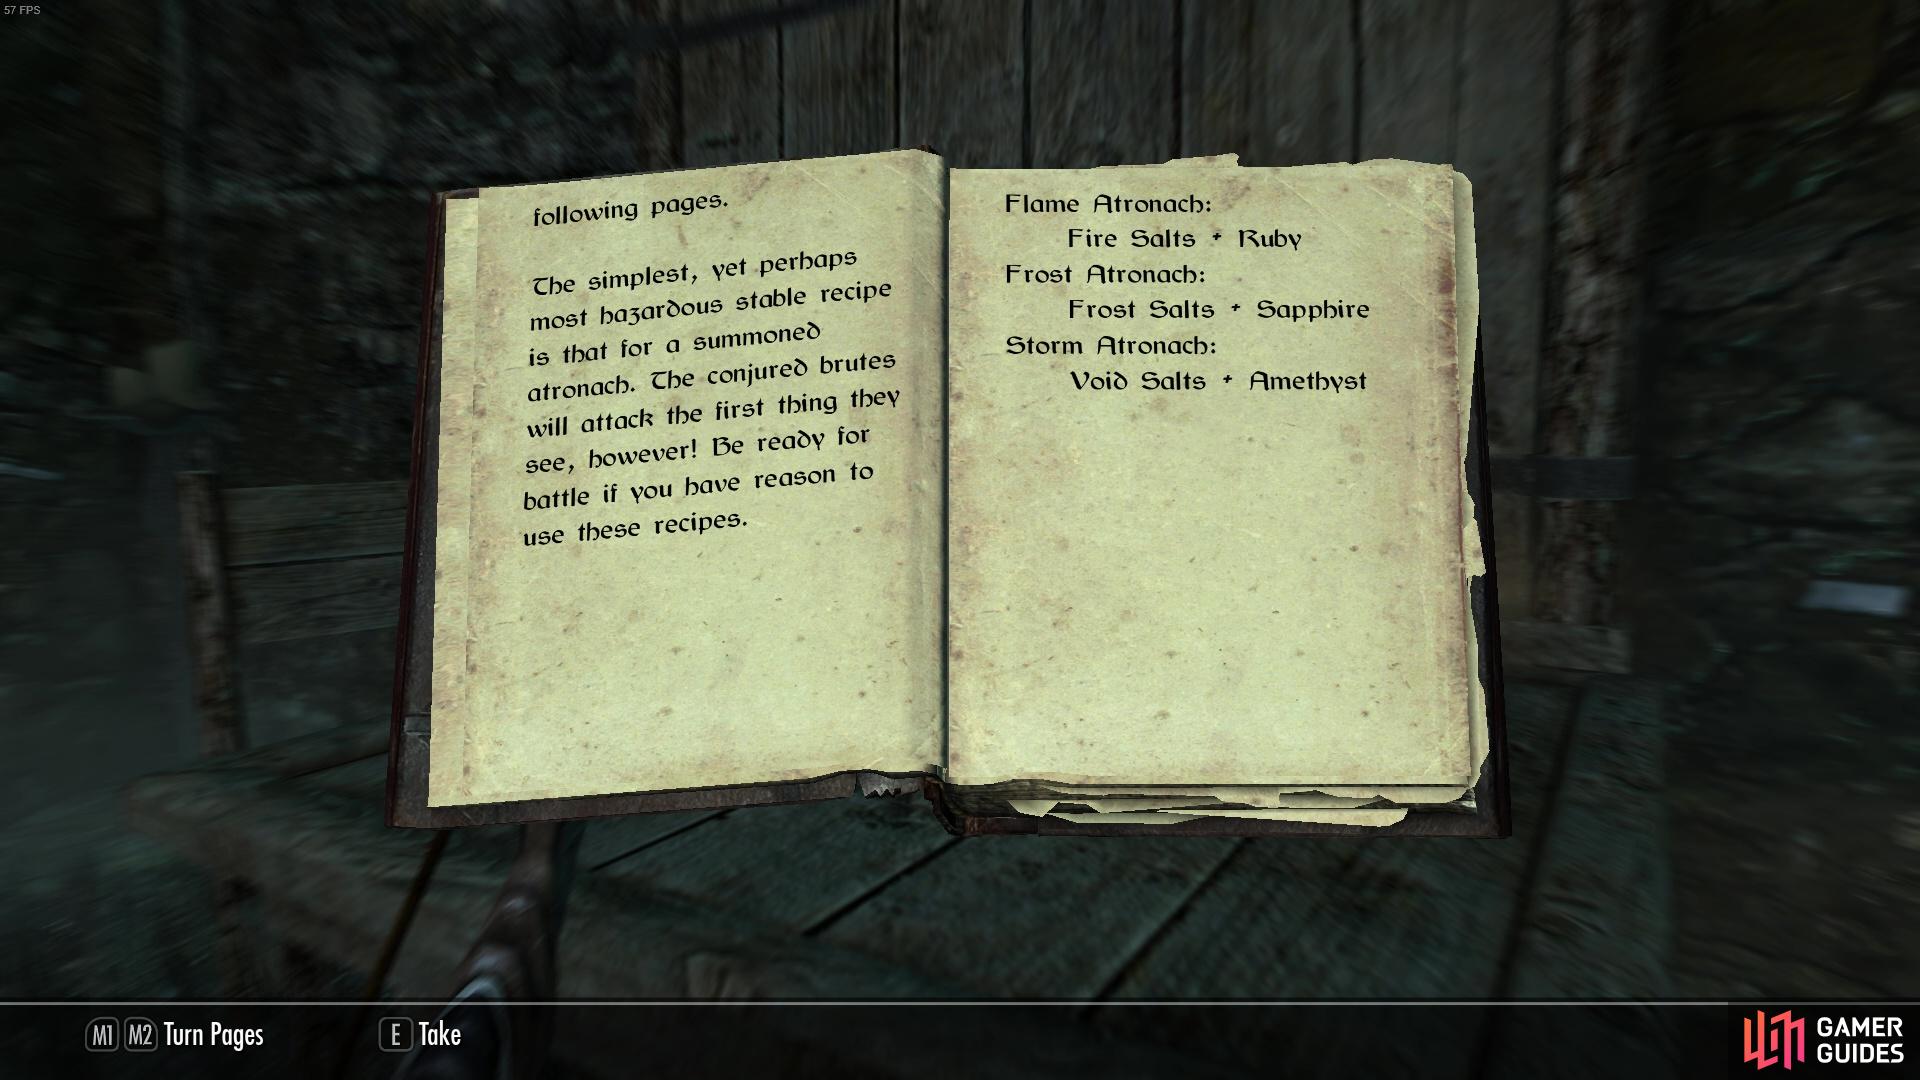 The book near the forge will give you information on the types of things you can conjure